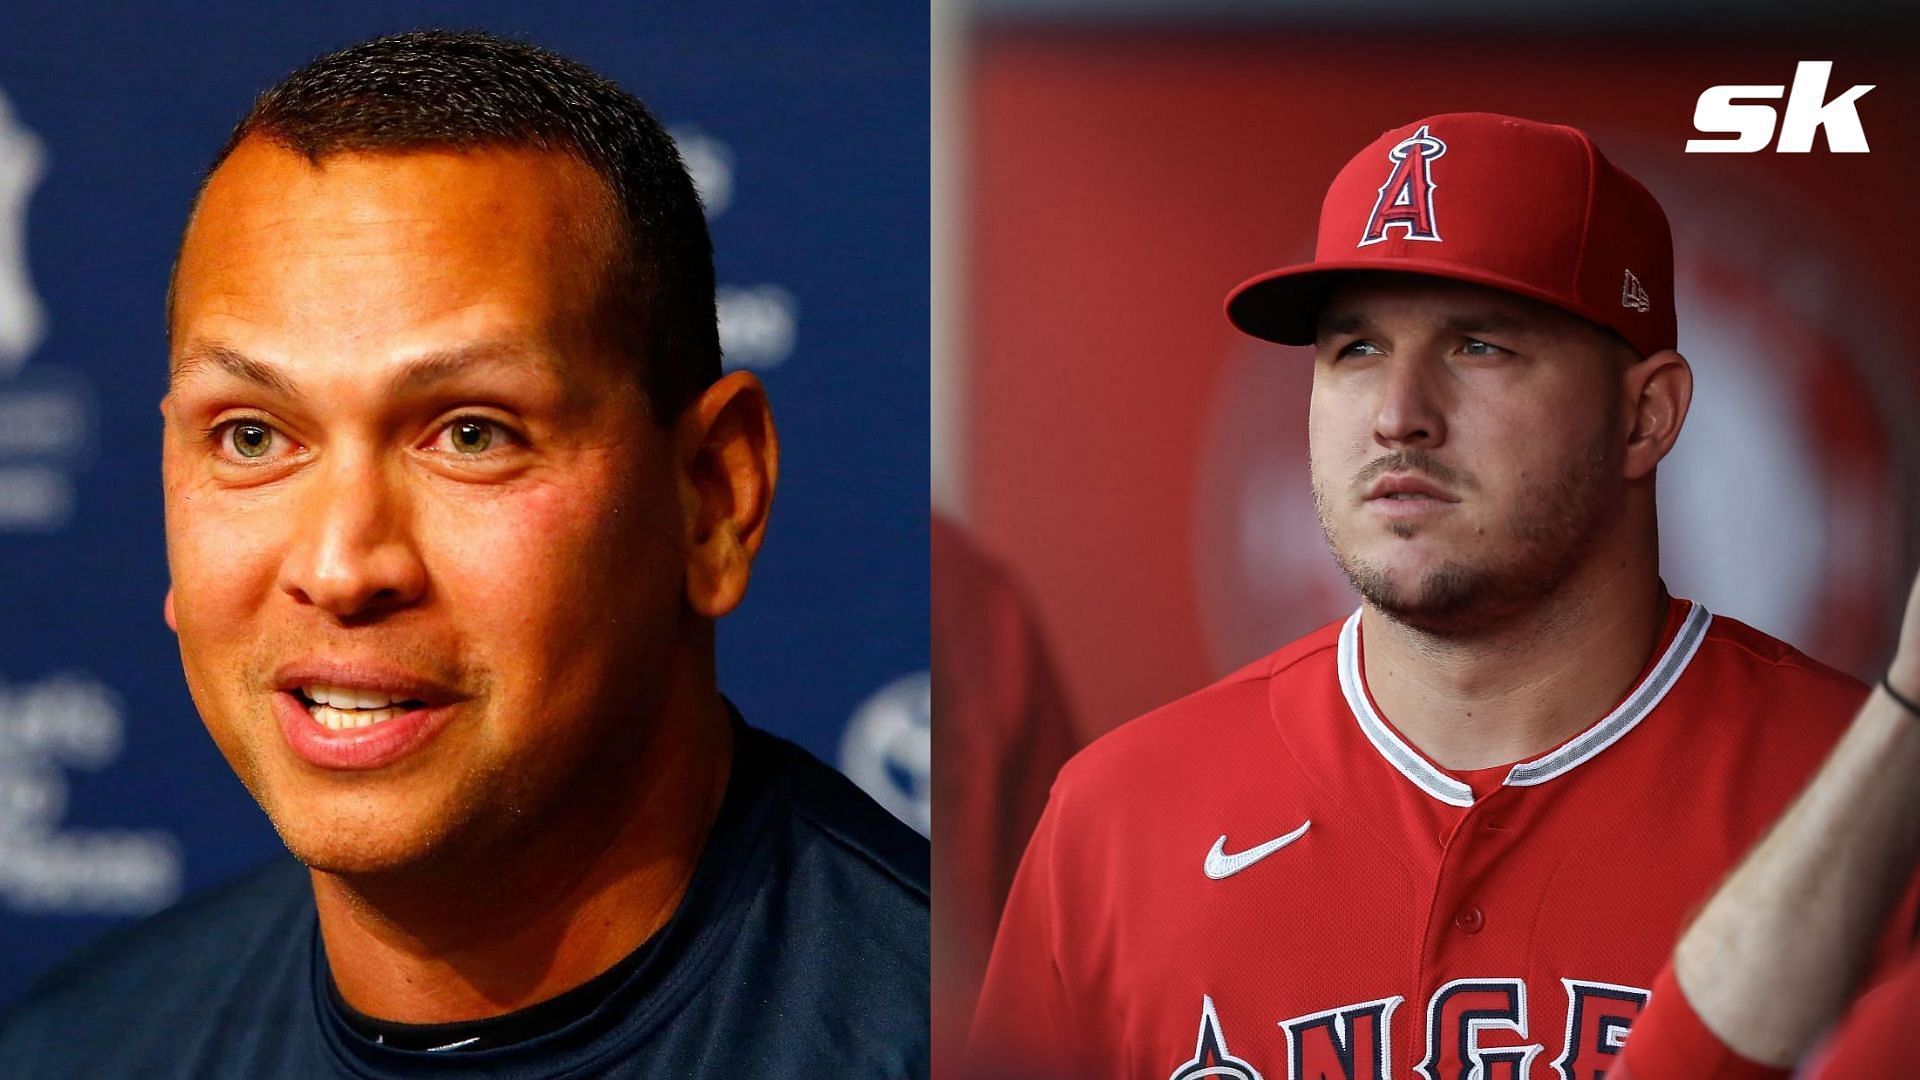 Mike Trout condemned steroids and their users in a 2013 radio interview